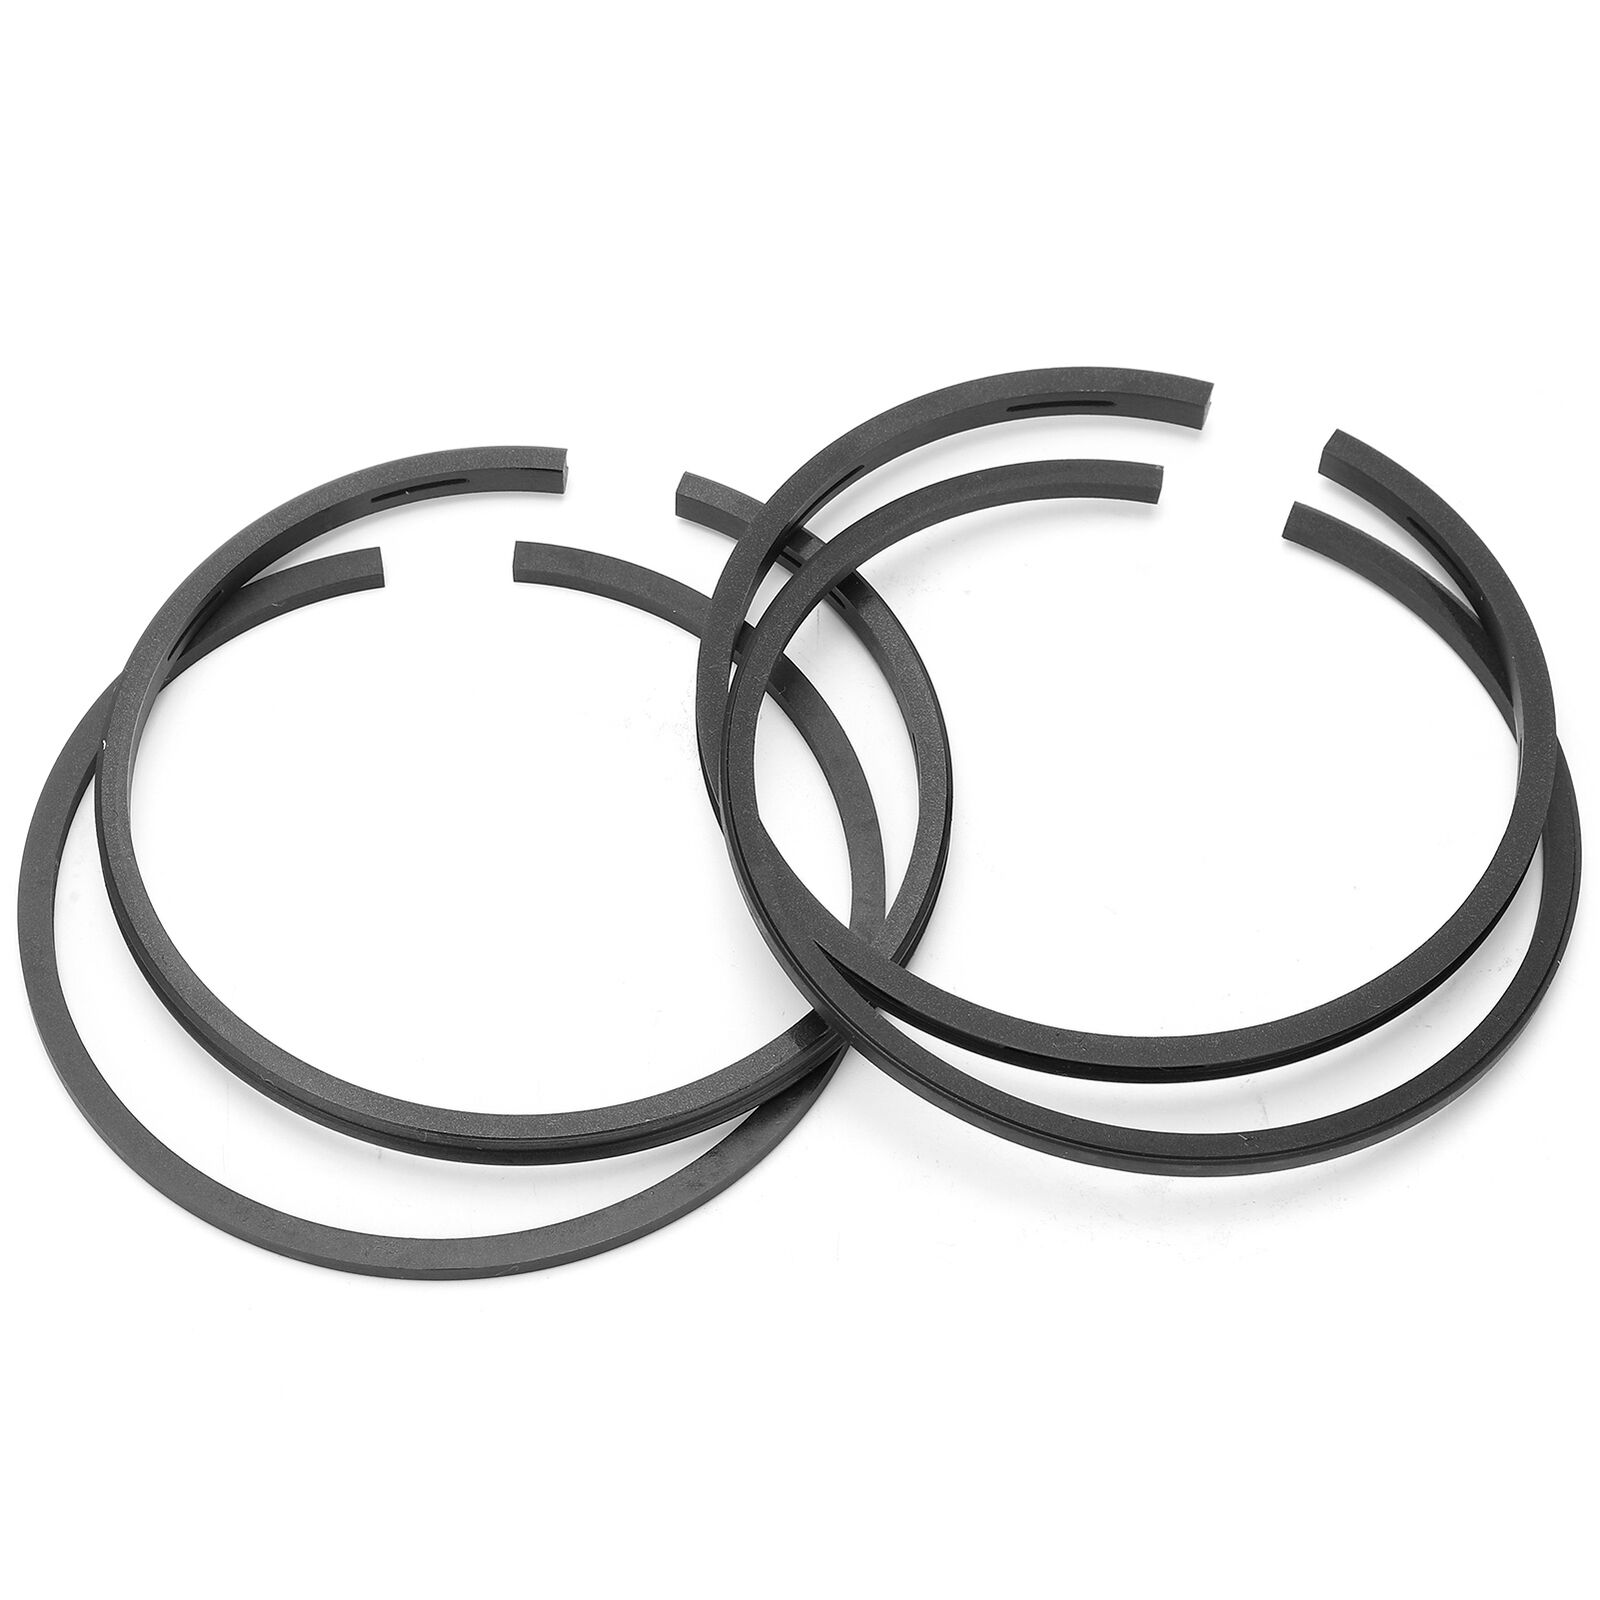 4x Q90 Piston Ring Fit For 7.5KW Motor 10HP Air Compressor Air Pump Accessories♫